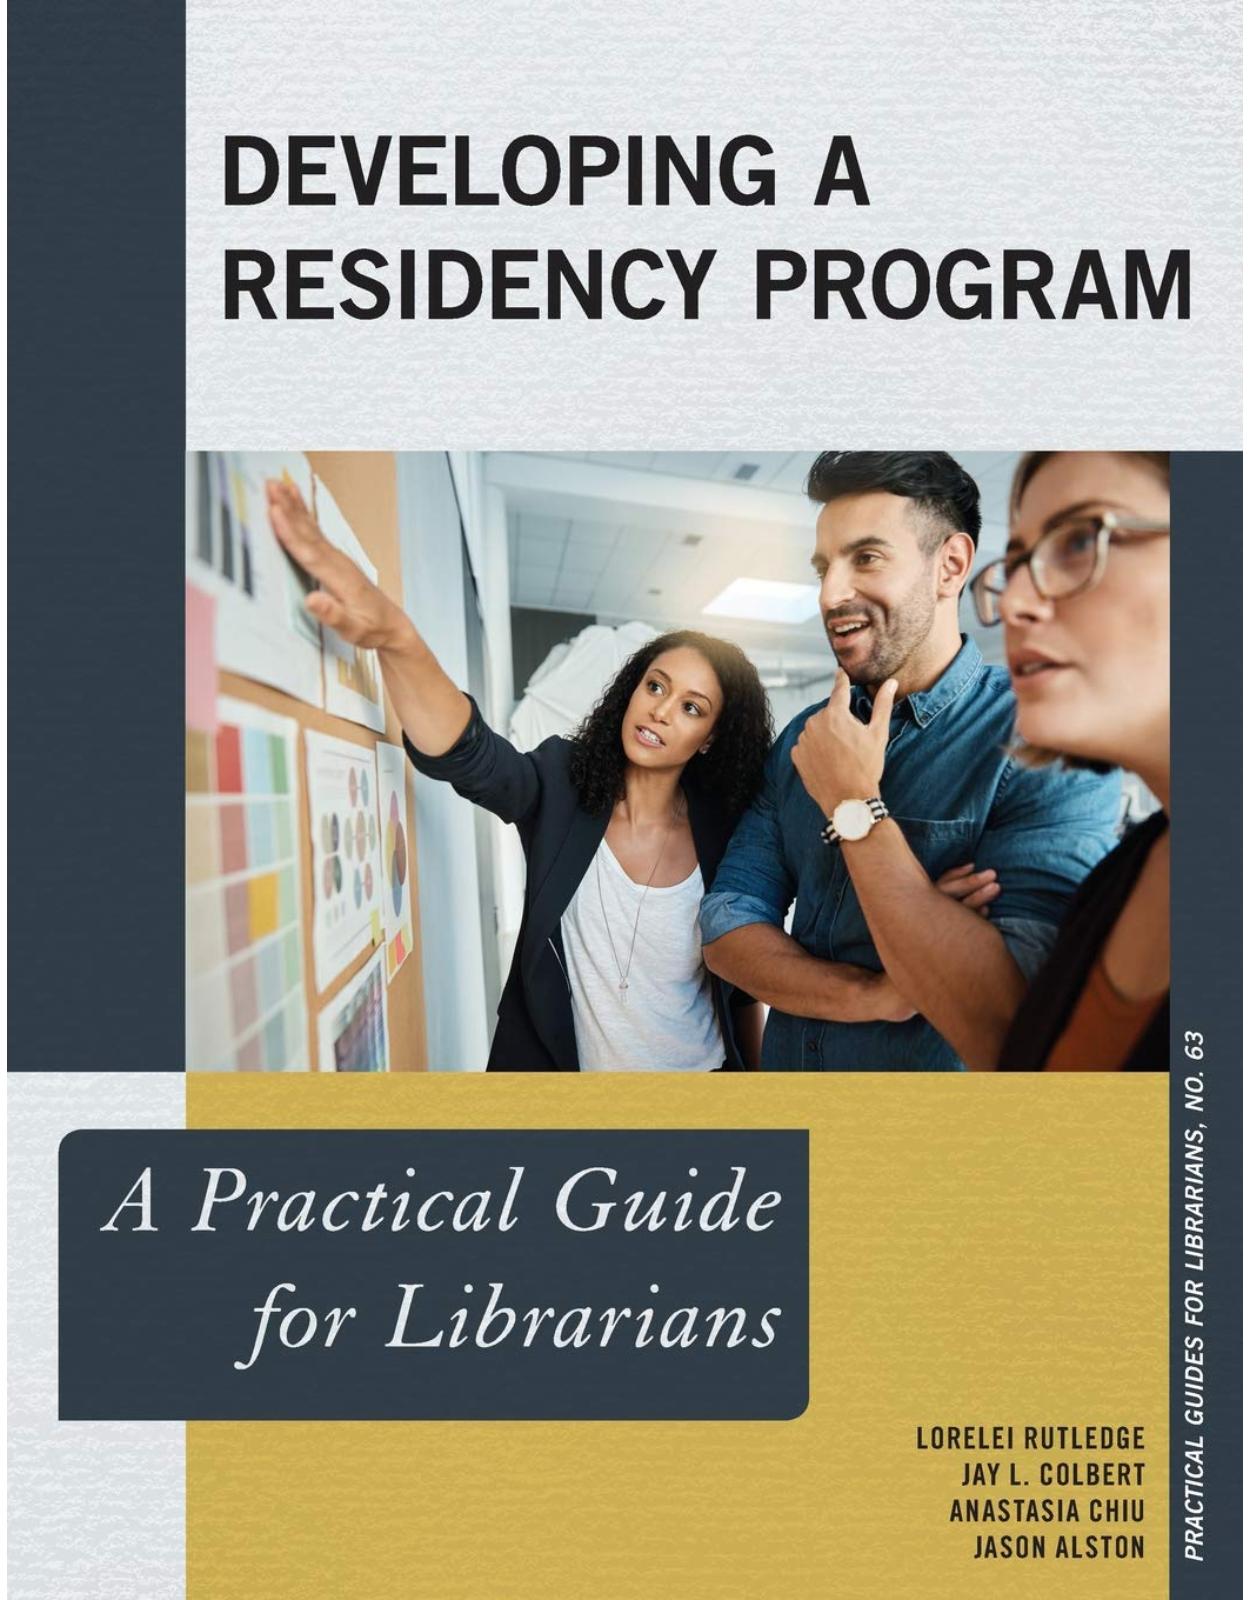 Developing a Residency Program A Practical Guide for Librarians